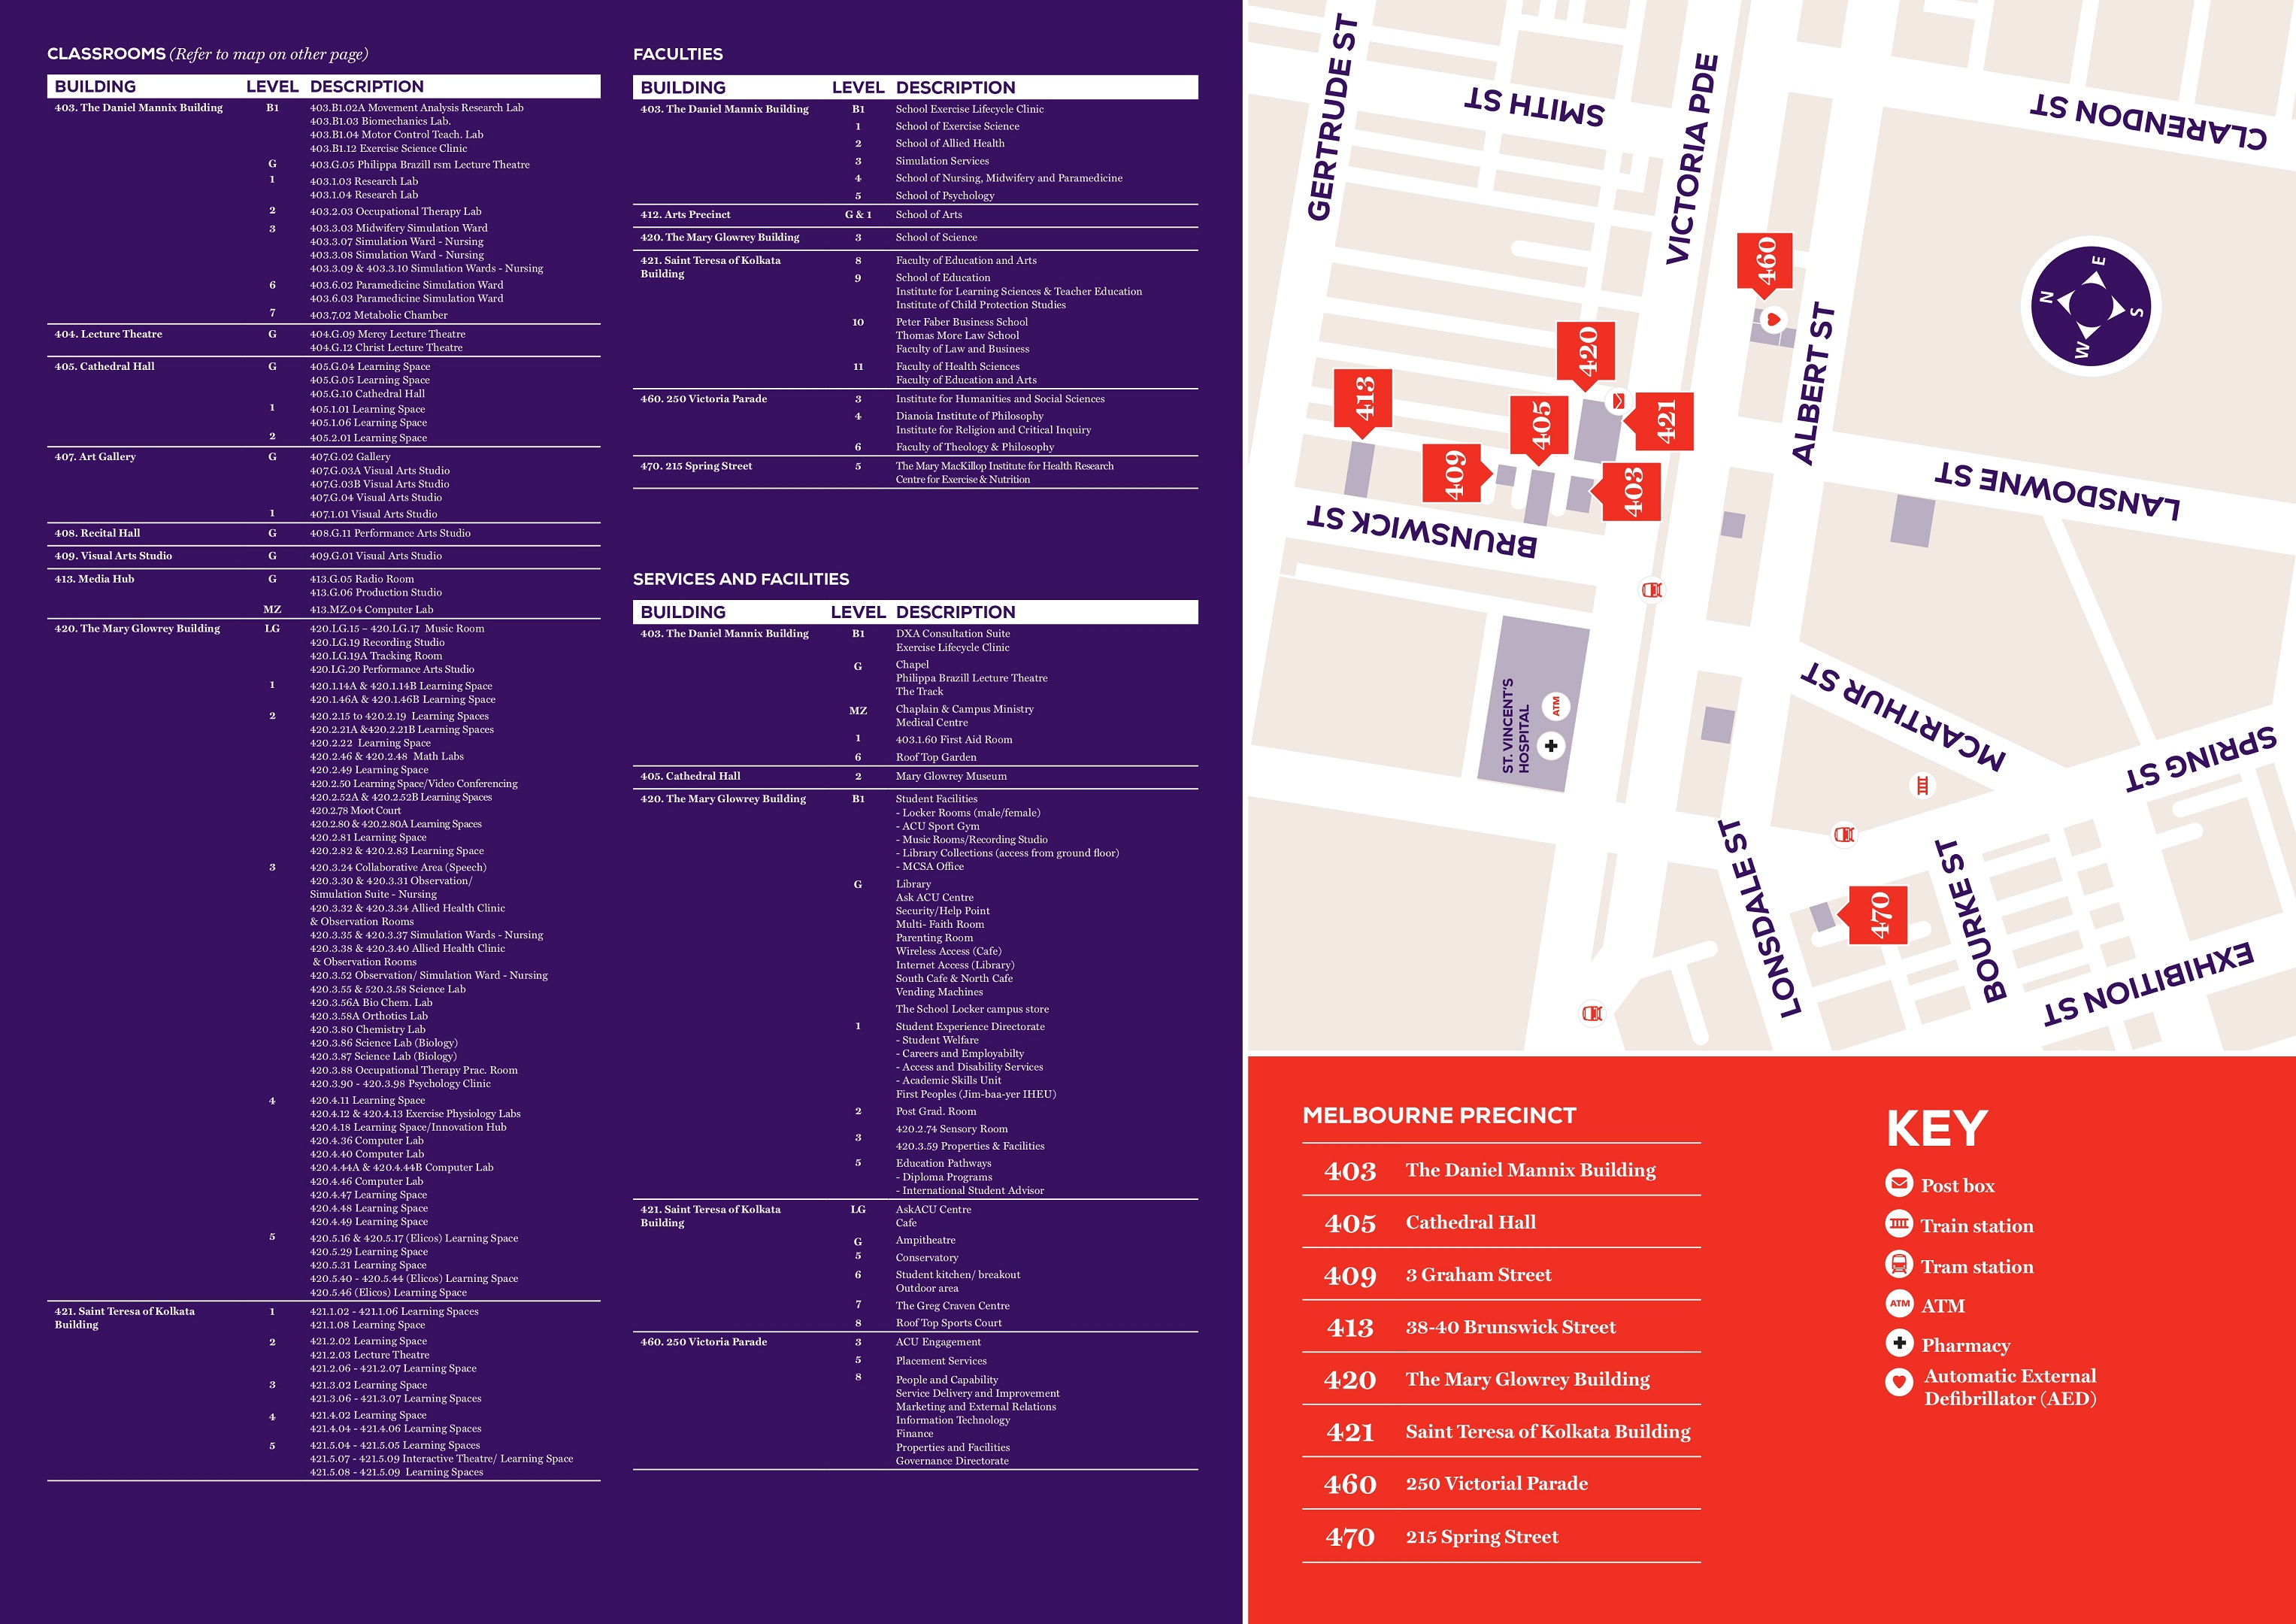 map of Melbourne campus site overview